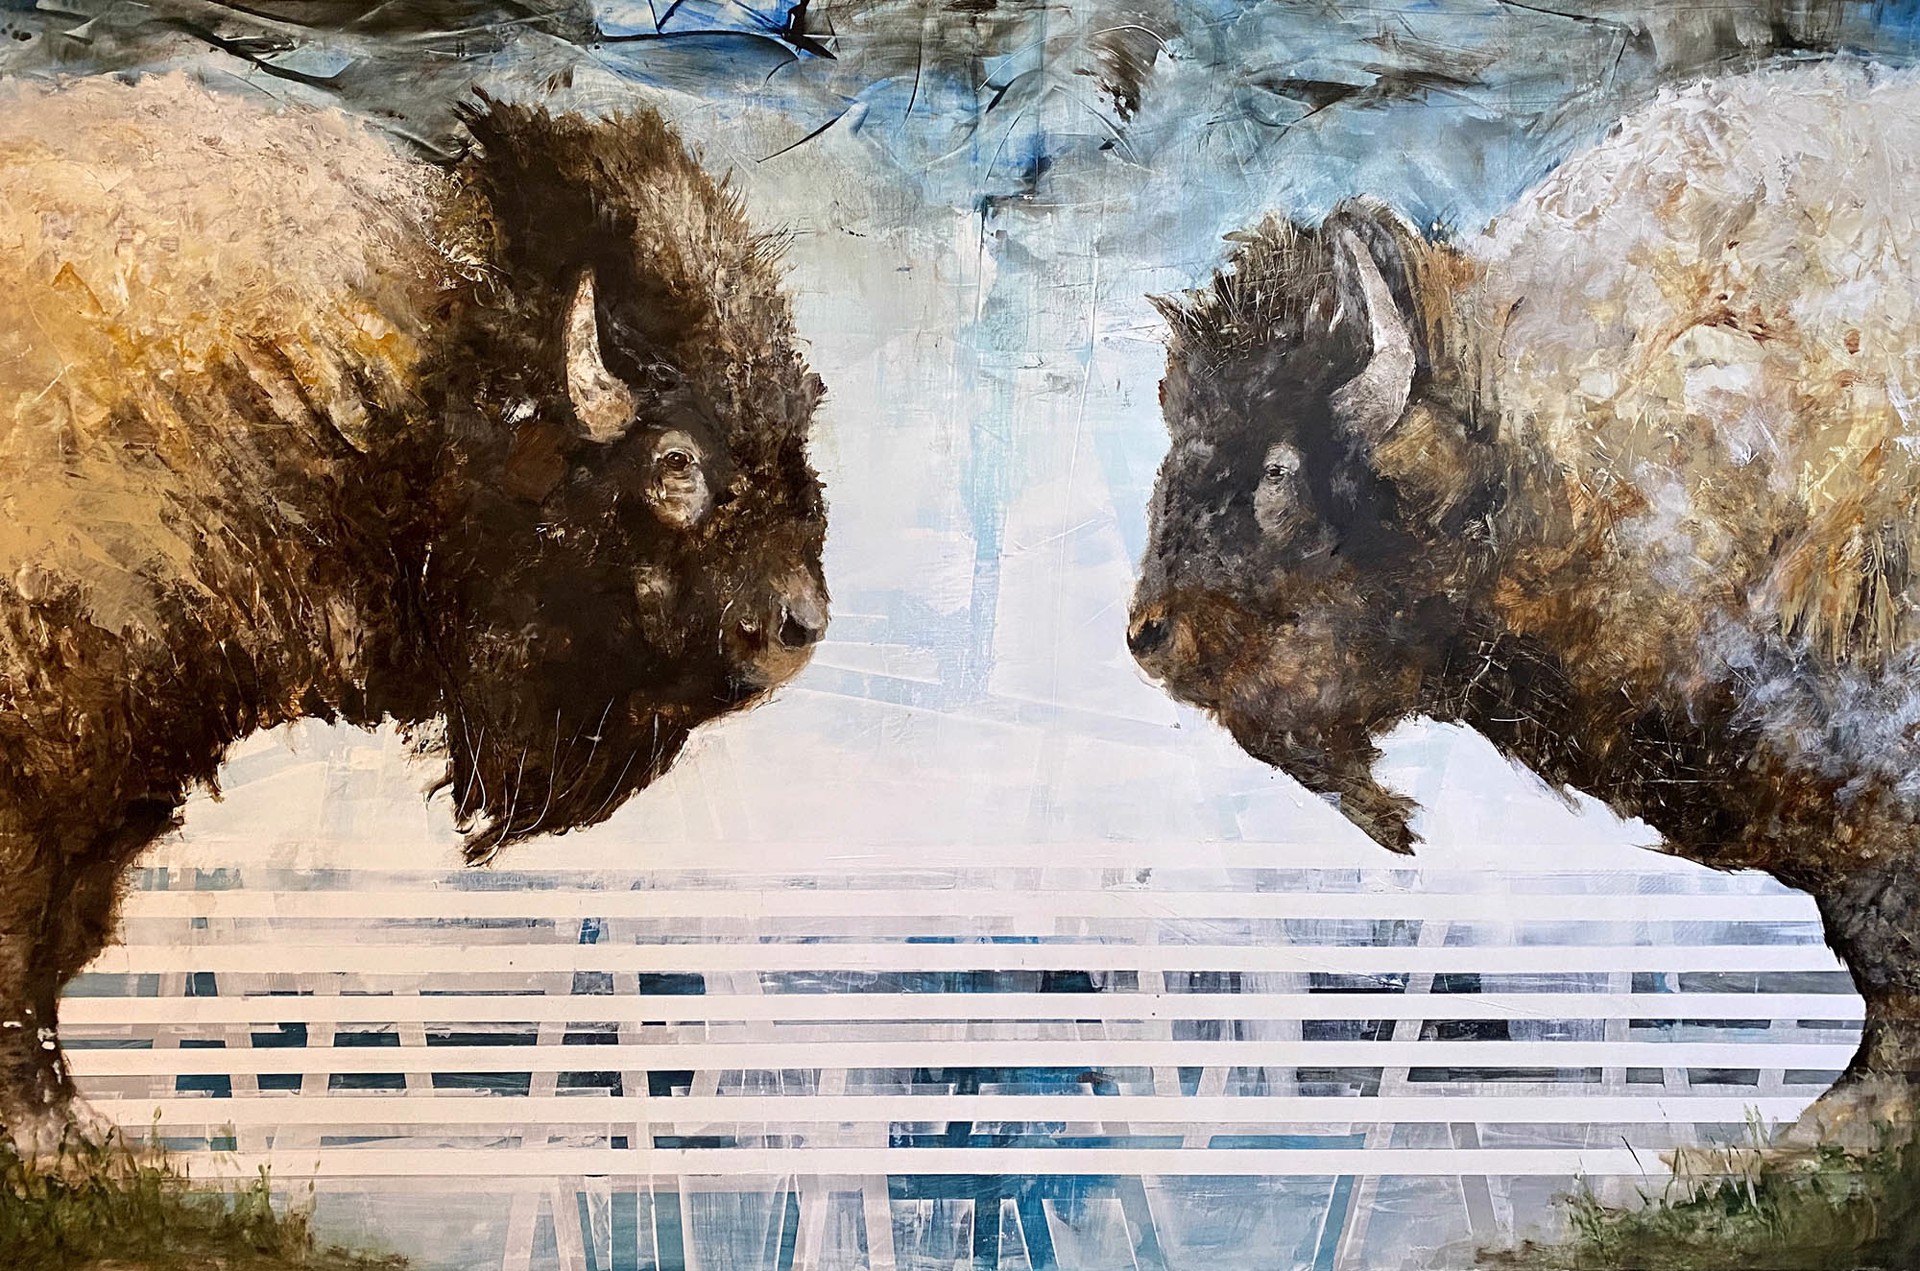 A Large Oil Painting Of Two Bison Facing Each Other Standing On Grass With An Abstract Contemporary Blue Lined Patterned Background, By Jenna Von Benedikt